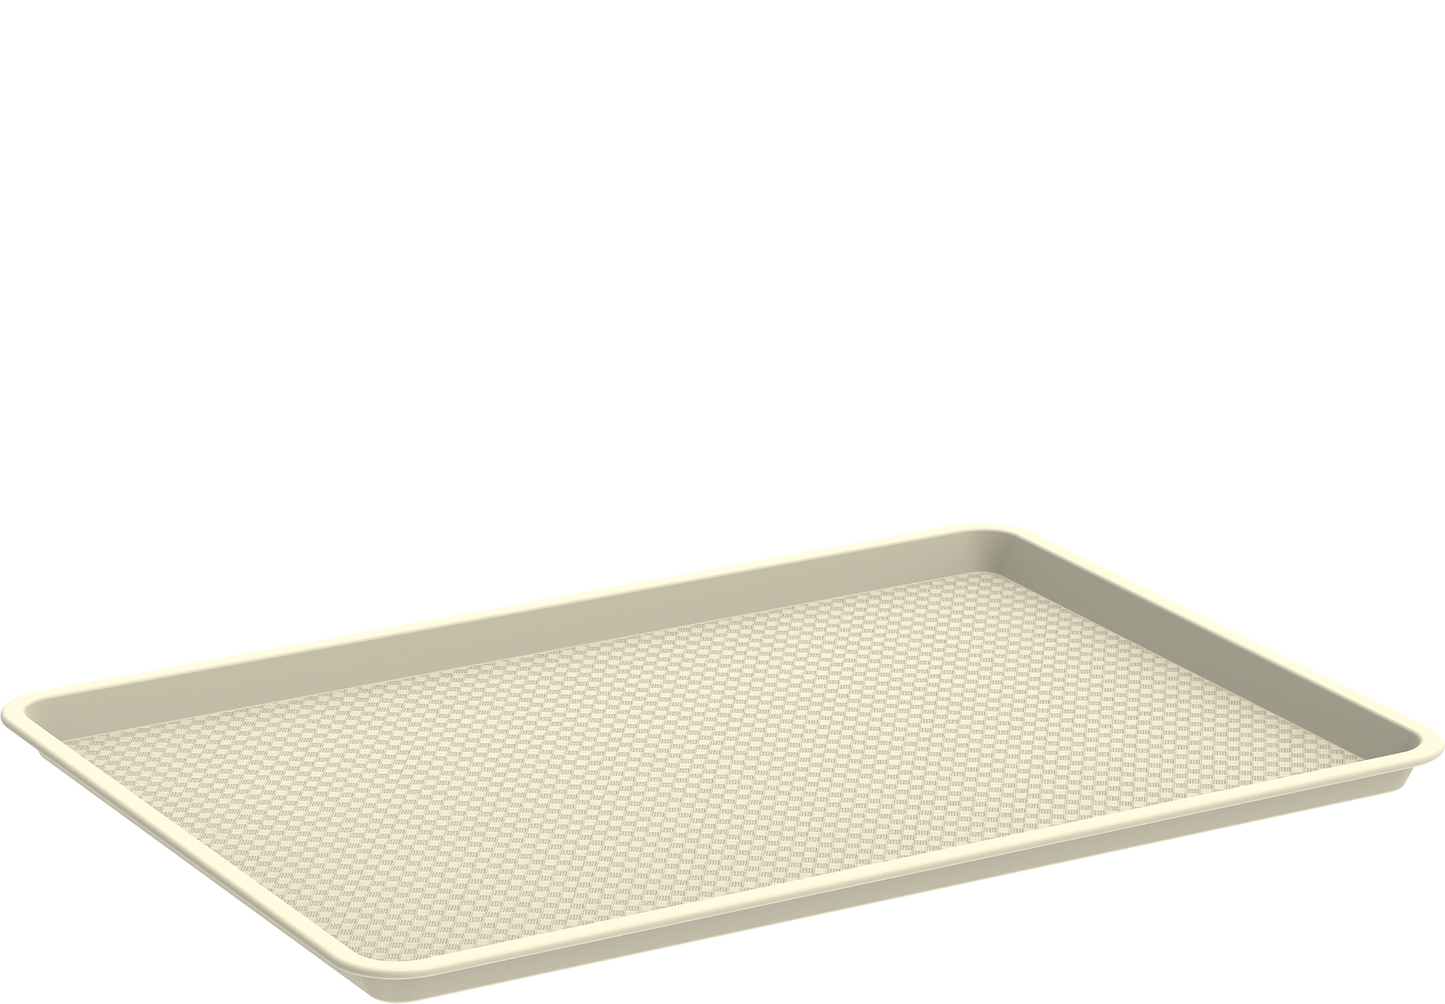 Serving Plastic Tray - Small